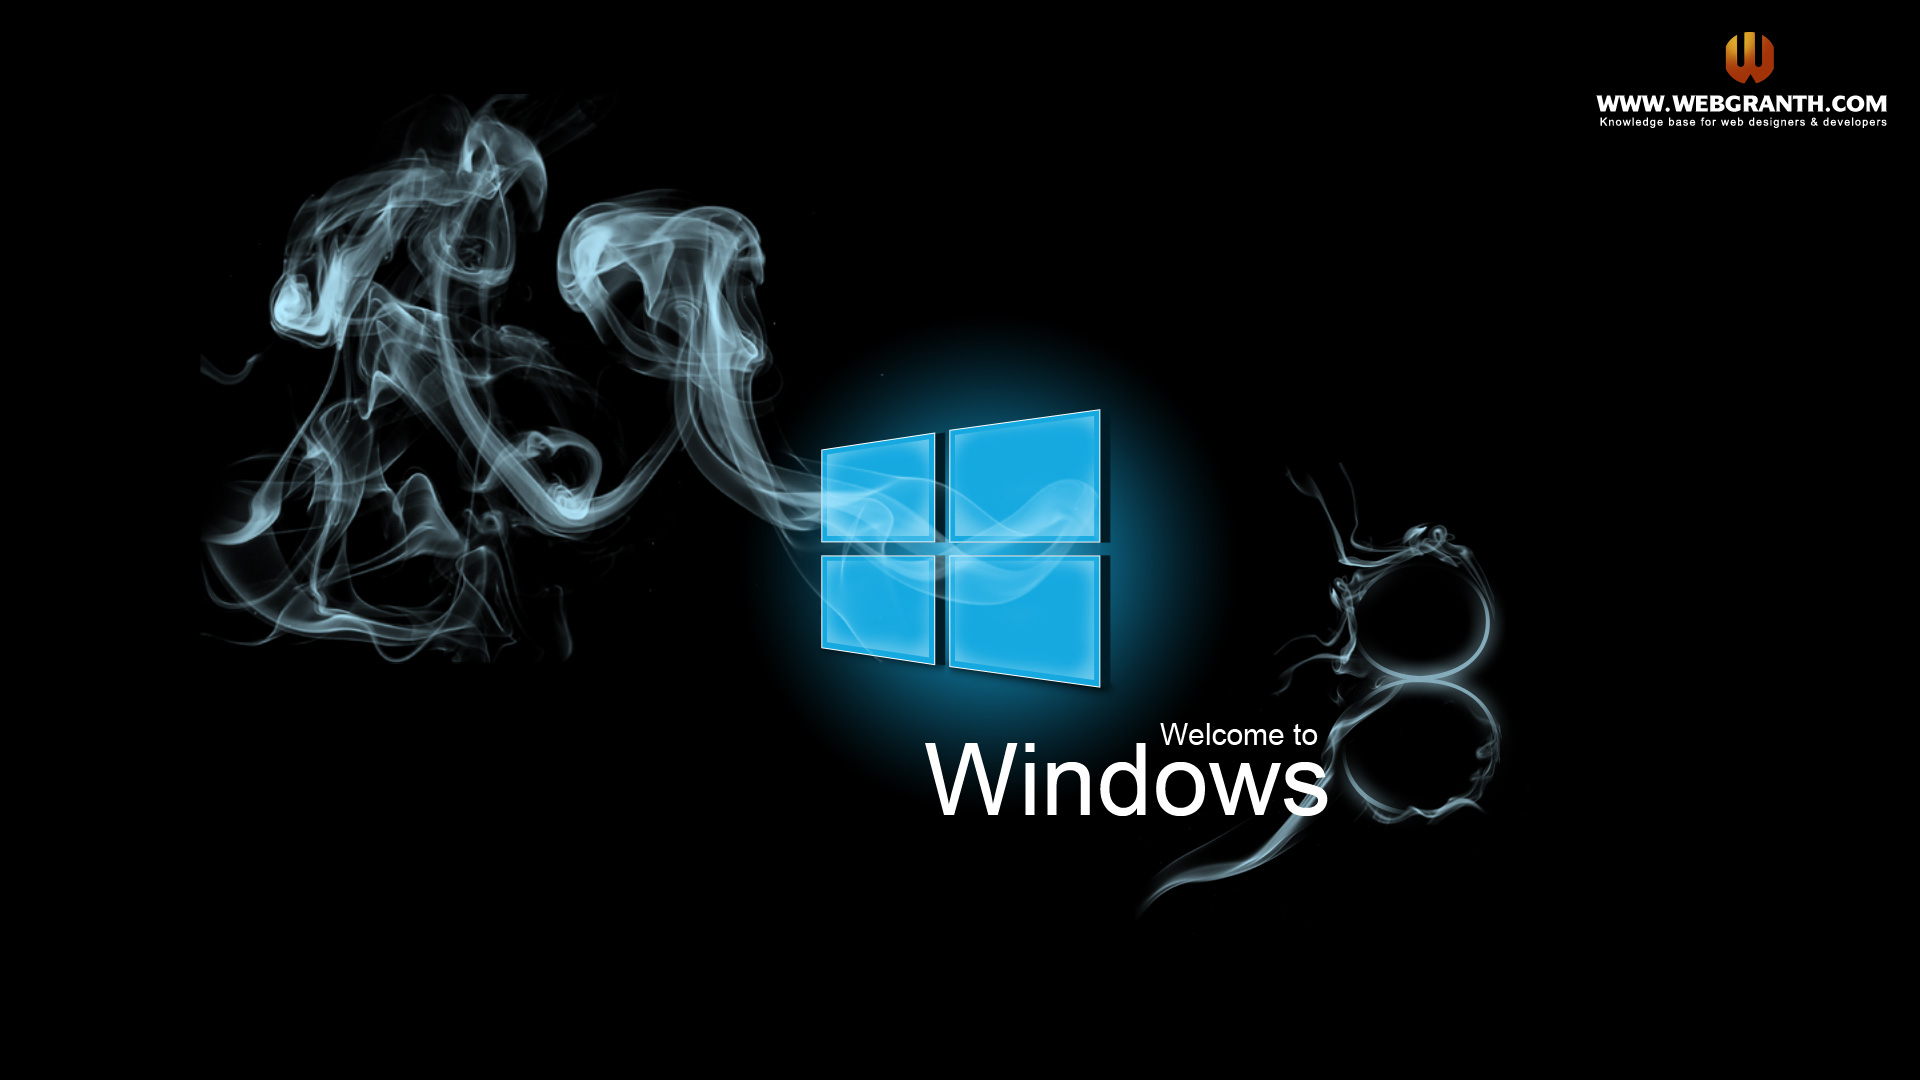 Too Love The Smoke Wallpaper This Window Background